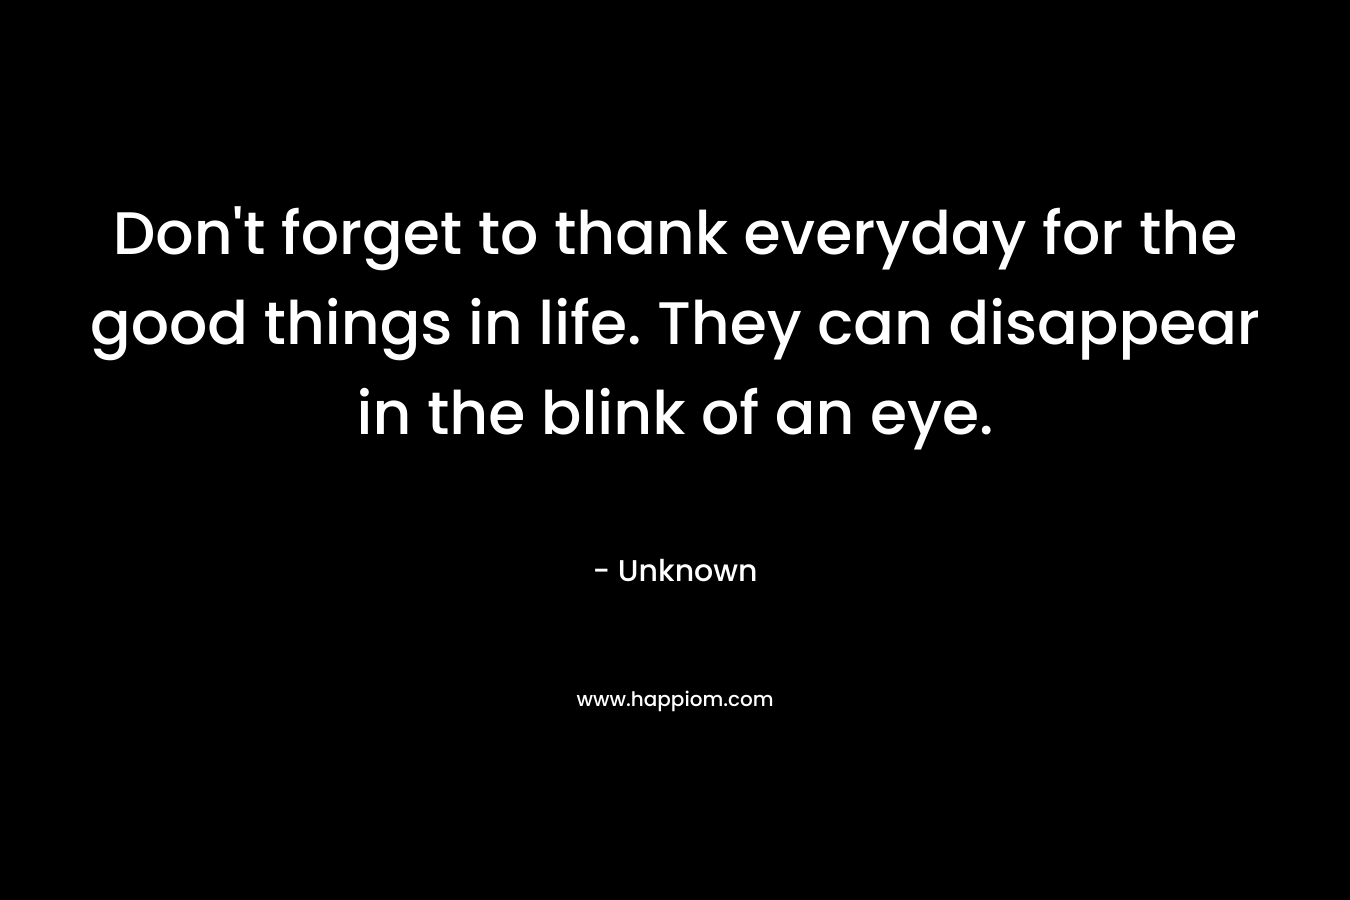 Don't forget to thank everyday for the good things in life. They can disappear in the blink of an eye.